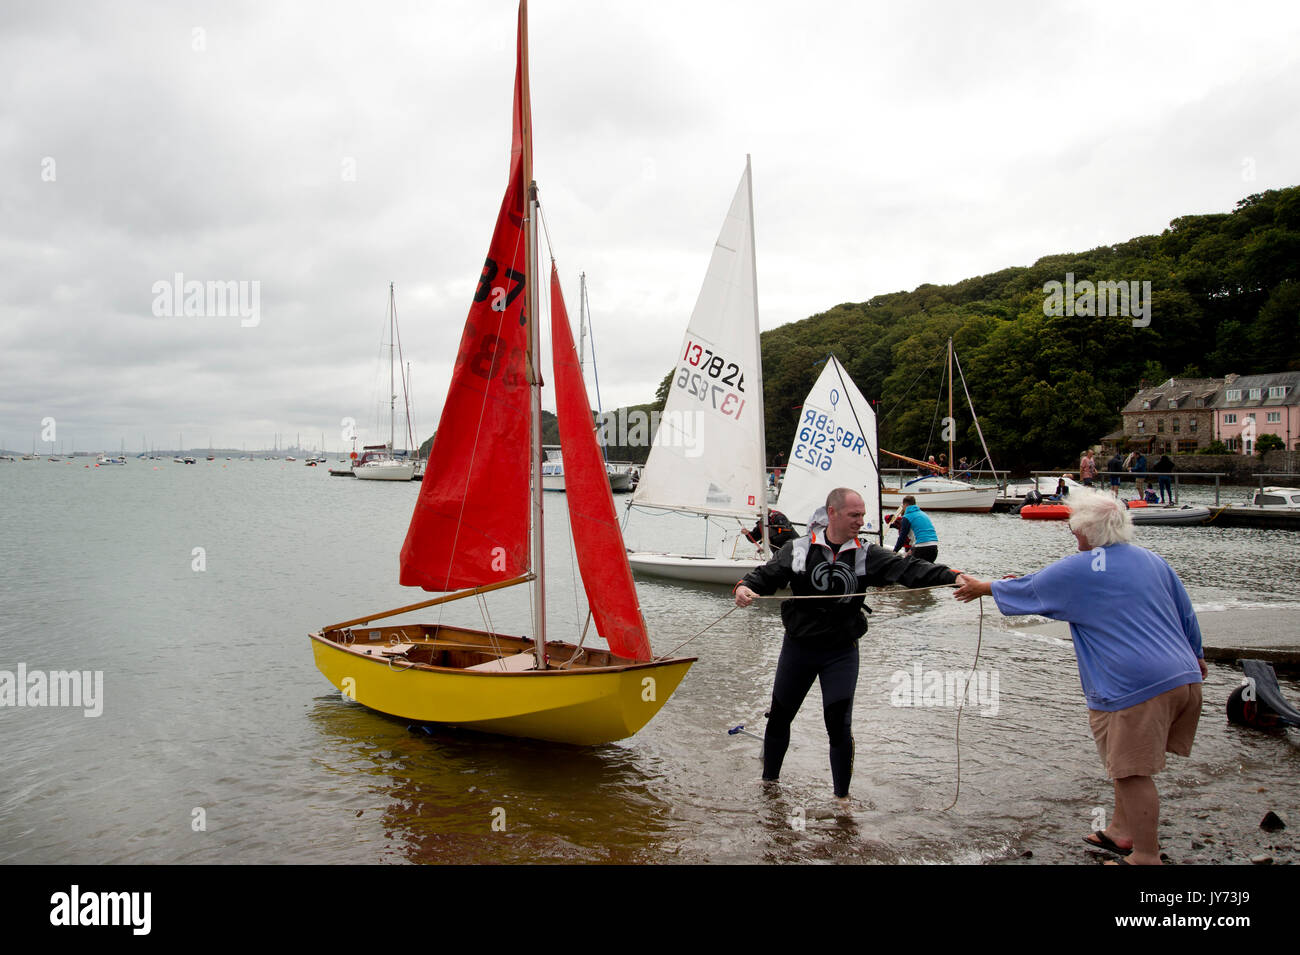 Dale, West Wales. Man in a wetsuit with a Mirror dinghy off the beach preparing to set sail. Stock Photo